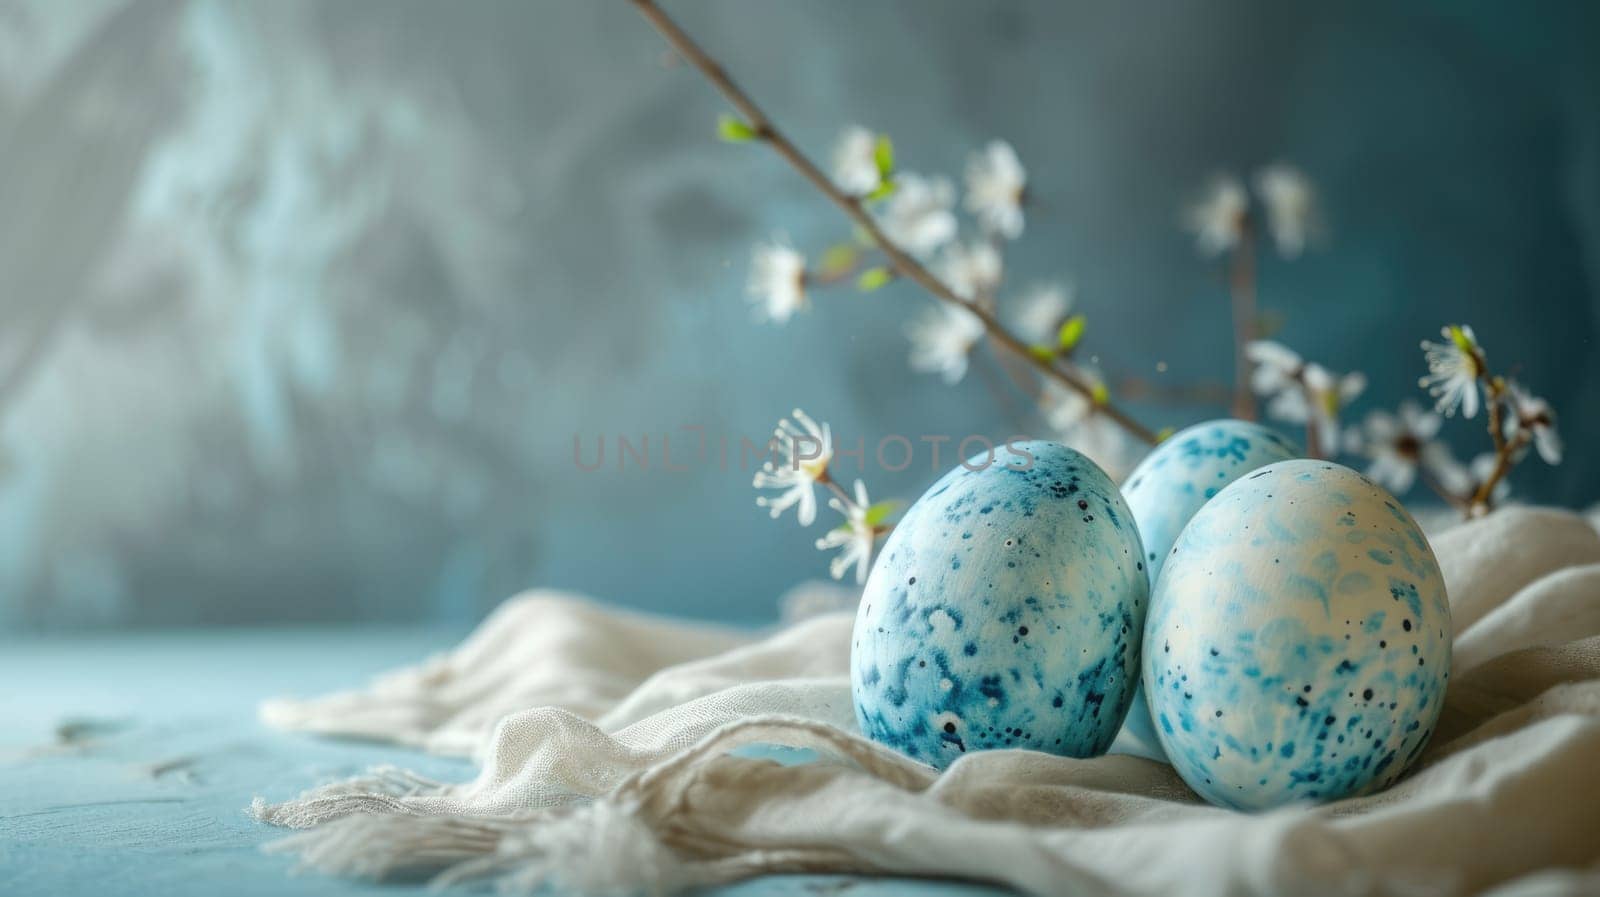 Blue Easter Eggs with White Polka Dots on Light Blue Background. Easter eggs by JuliaDorian